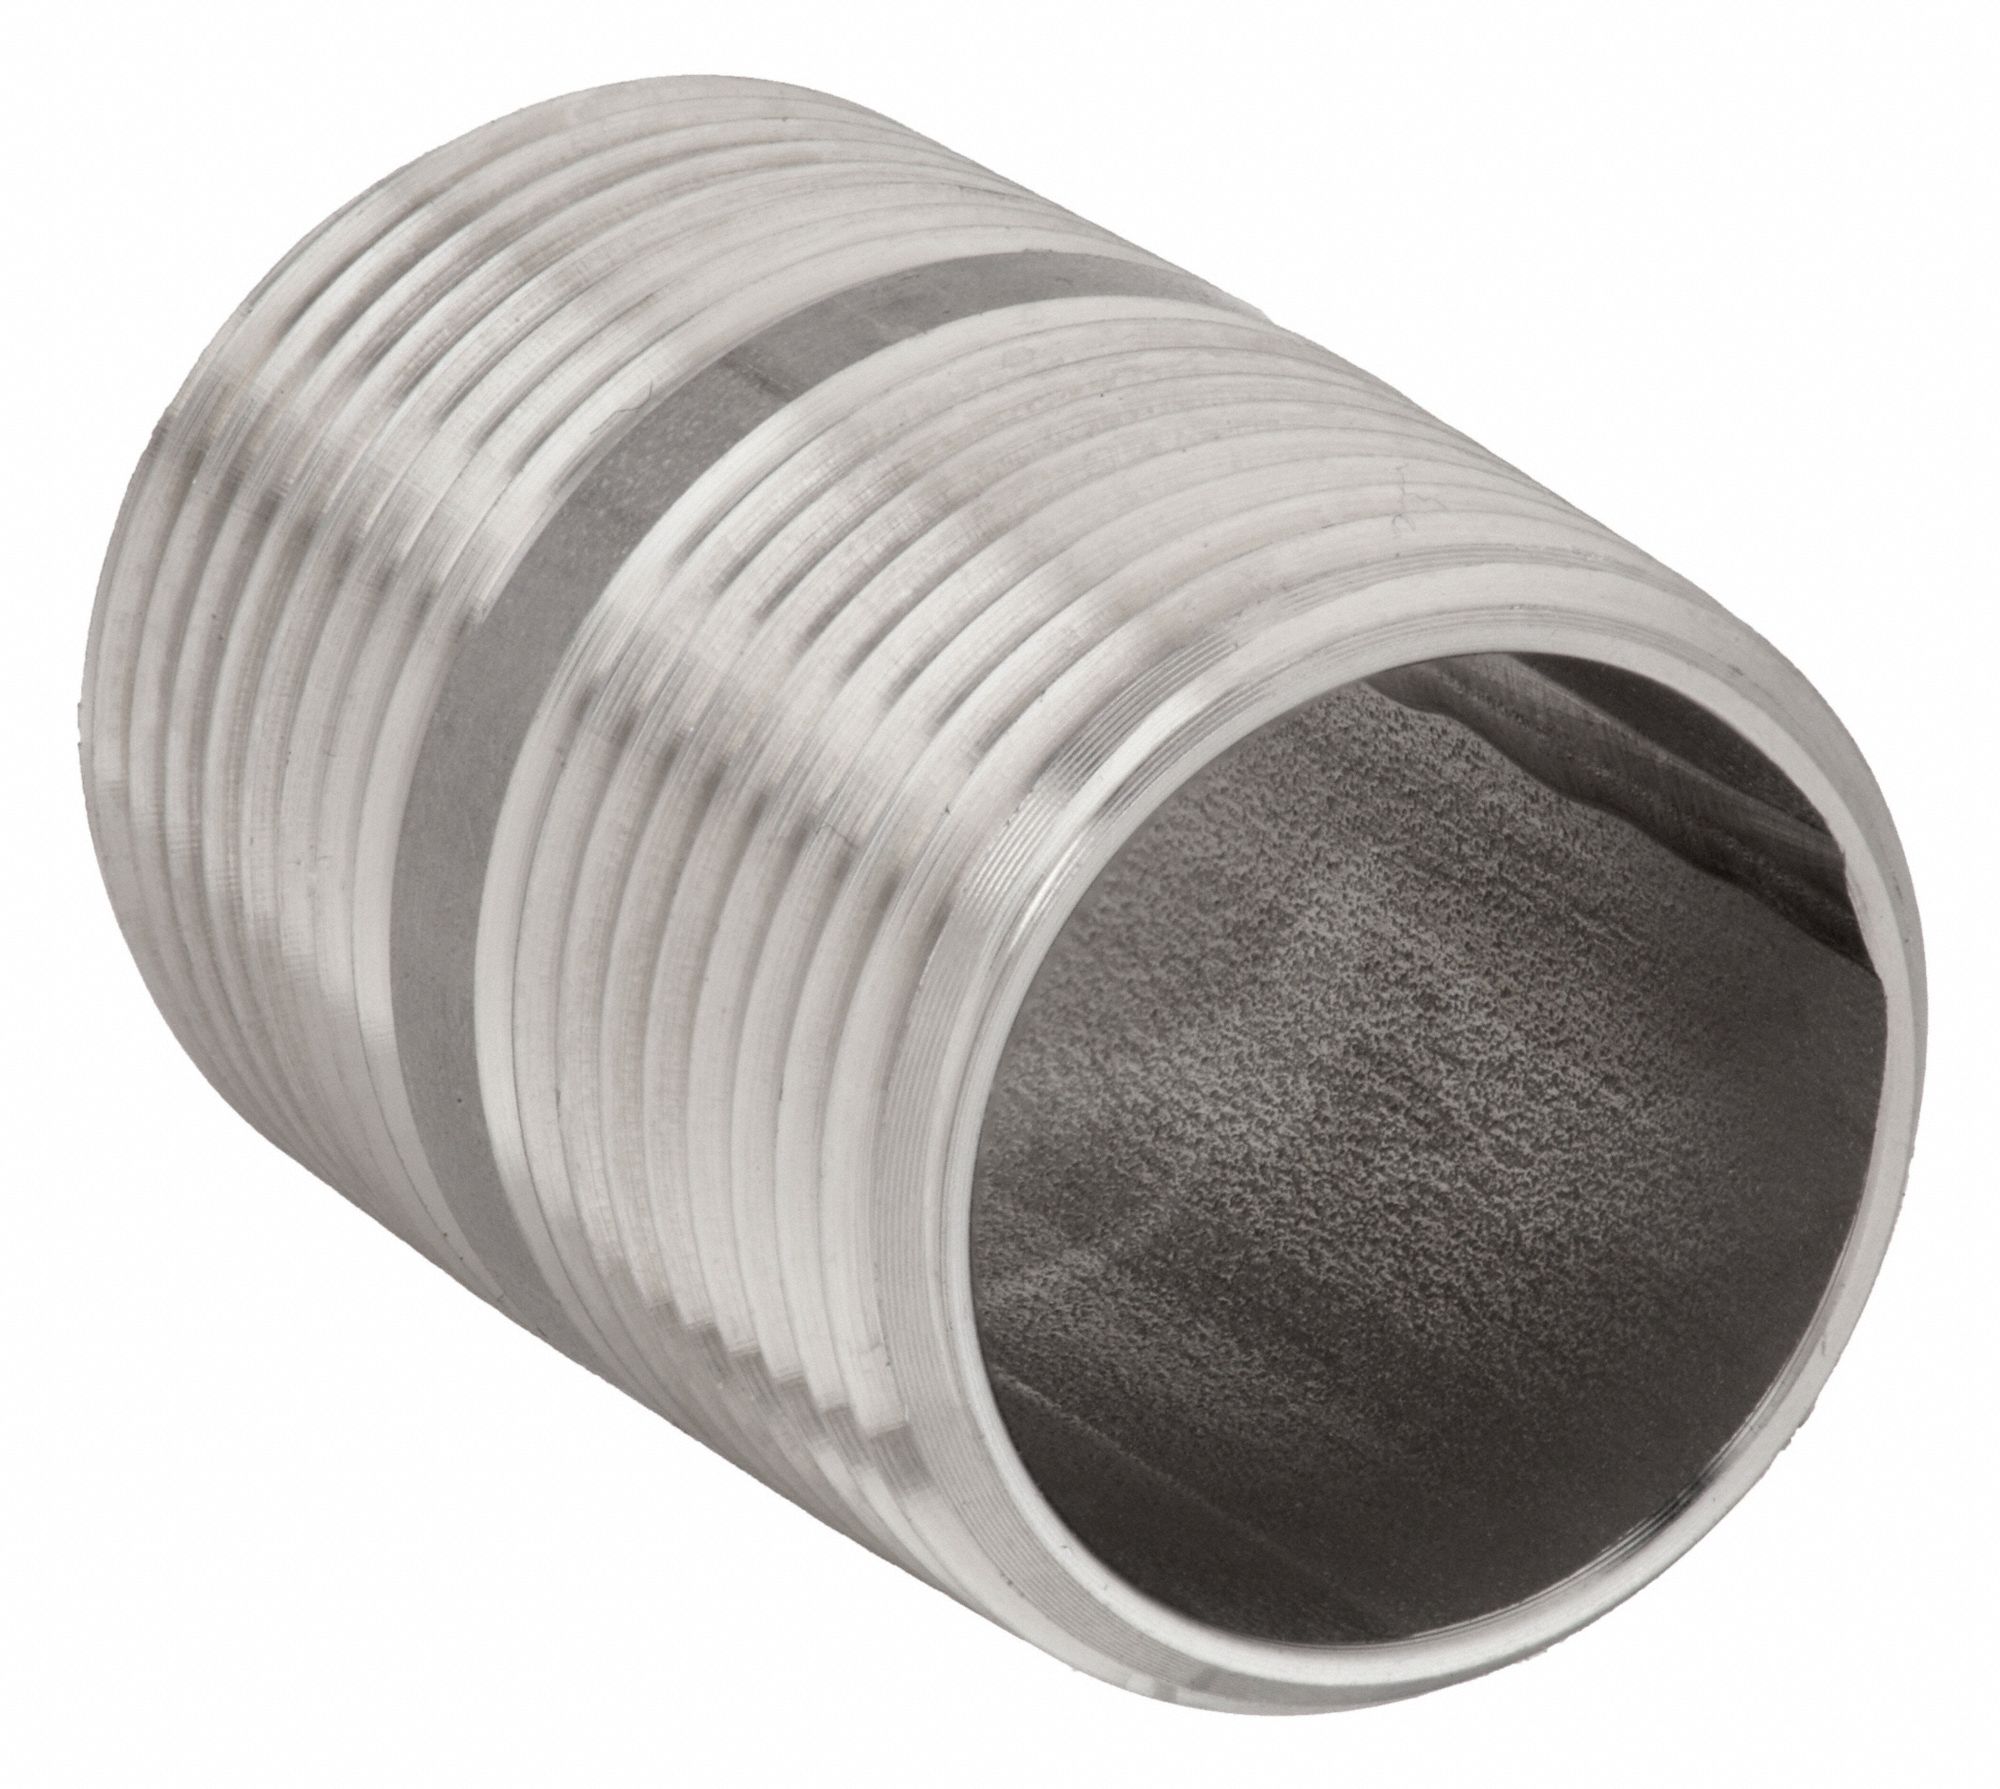 Nipple: 304 Stainless Steel, 1/2 in Nominal Pipe Size, 1 1/2 in Overall Lg,  Threaded on Both Ends